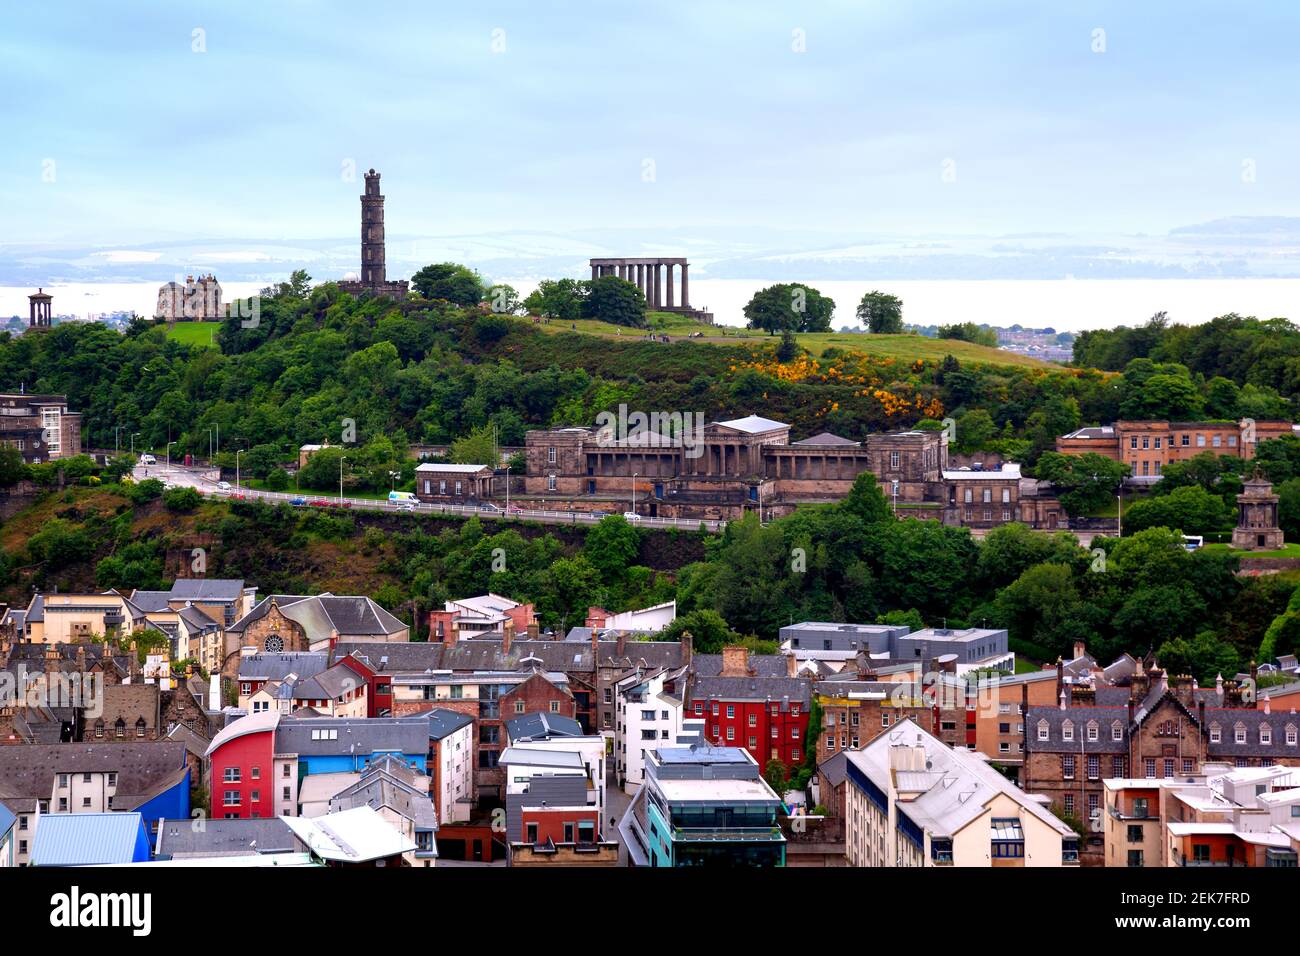 View of Calton Hill and Old Royal High School from Holyrood Park, Edinburgh, Scotland Stock Photo